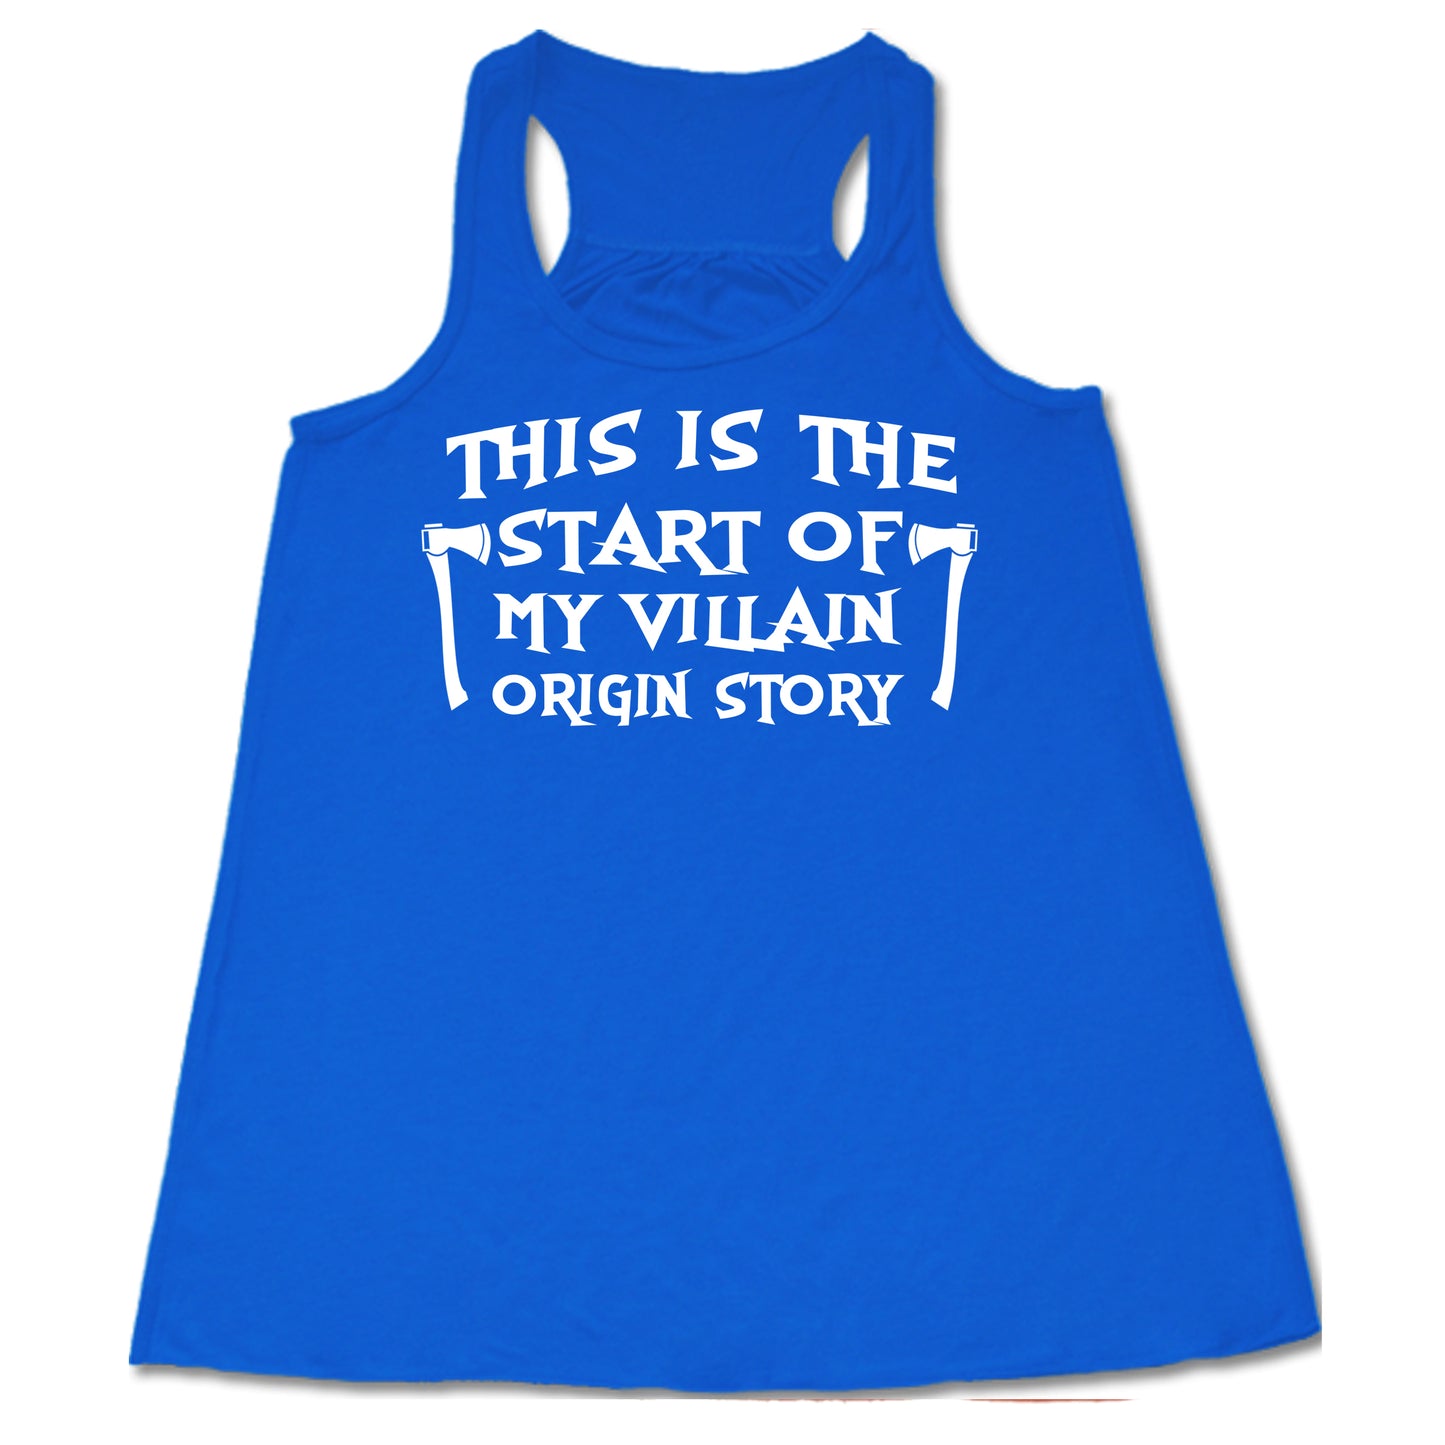 This Is The Start Of My Villain Origin Story blue tank top